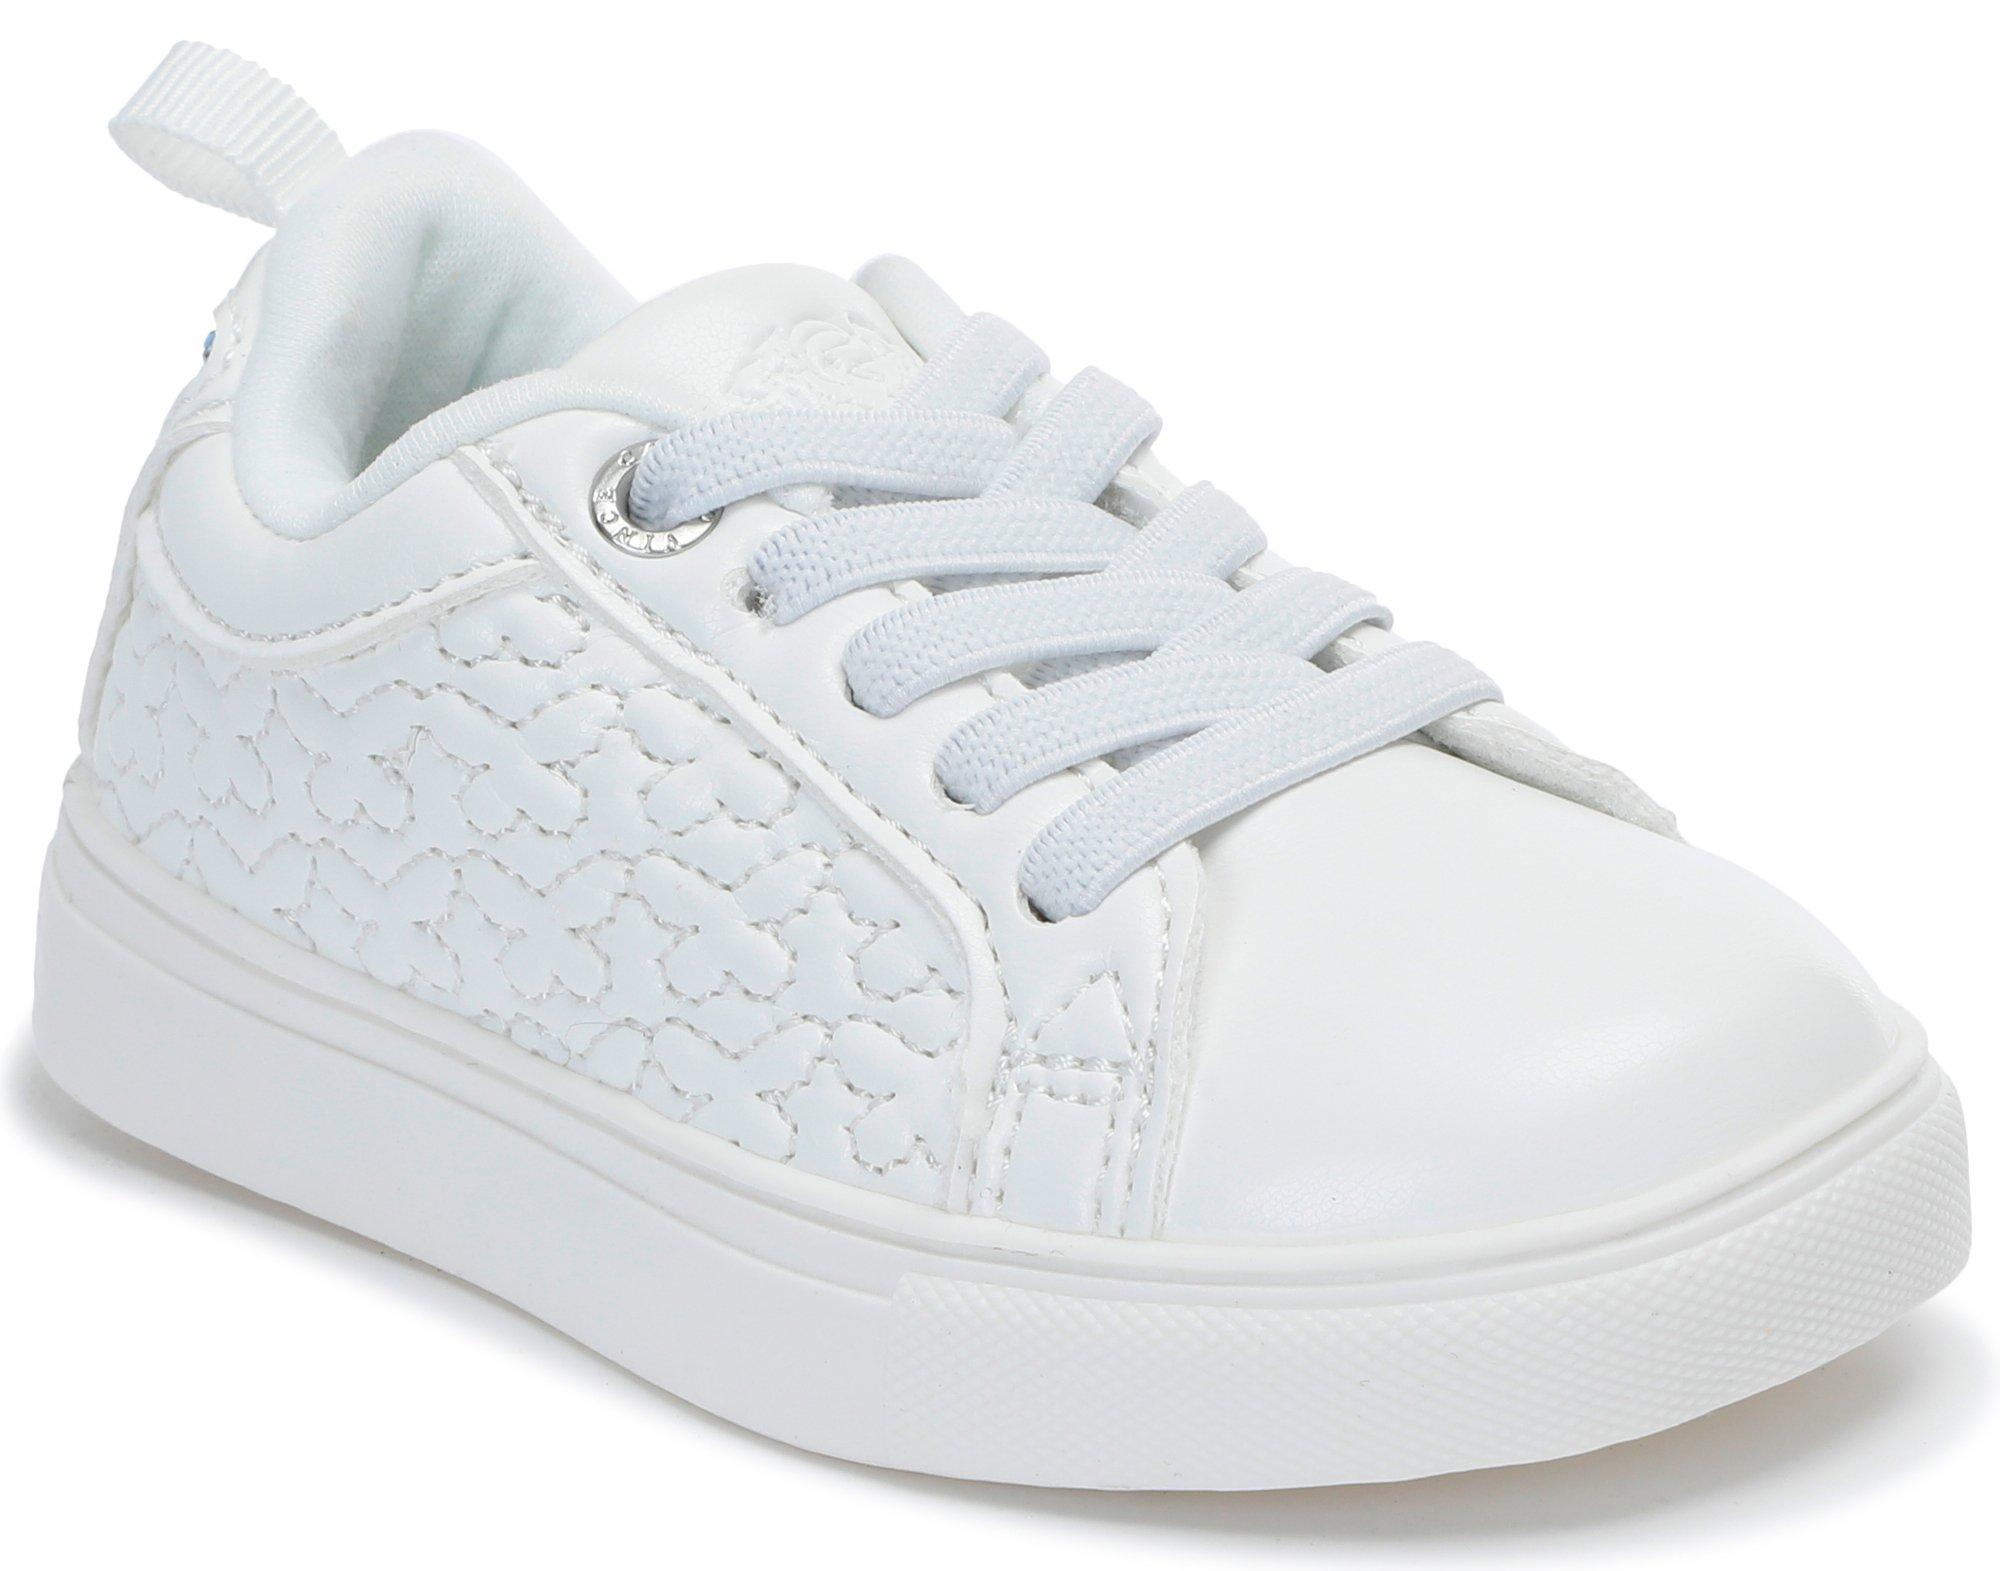 Toddler Girls Solid Sneakers